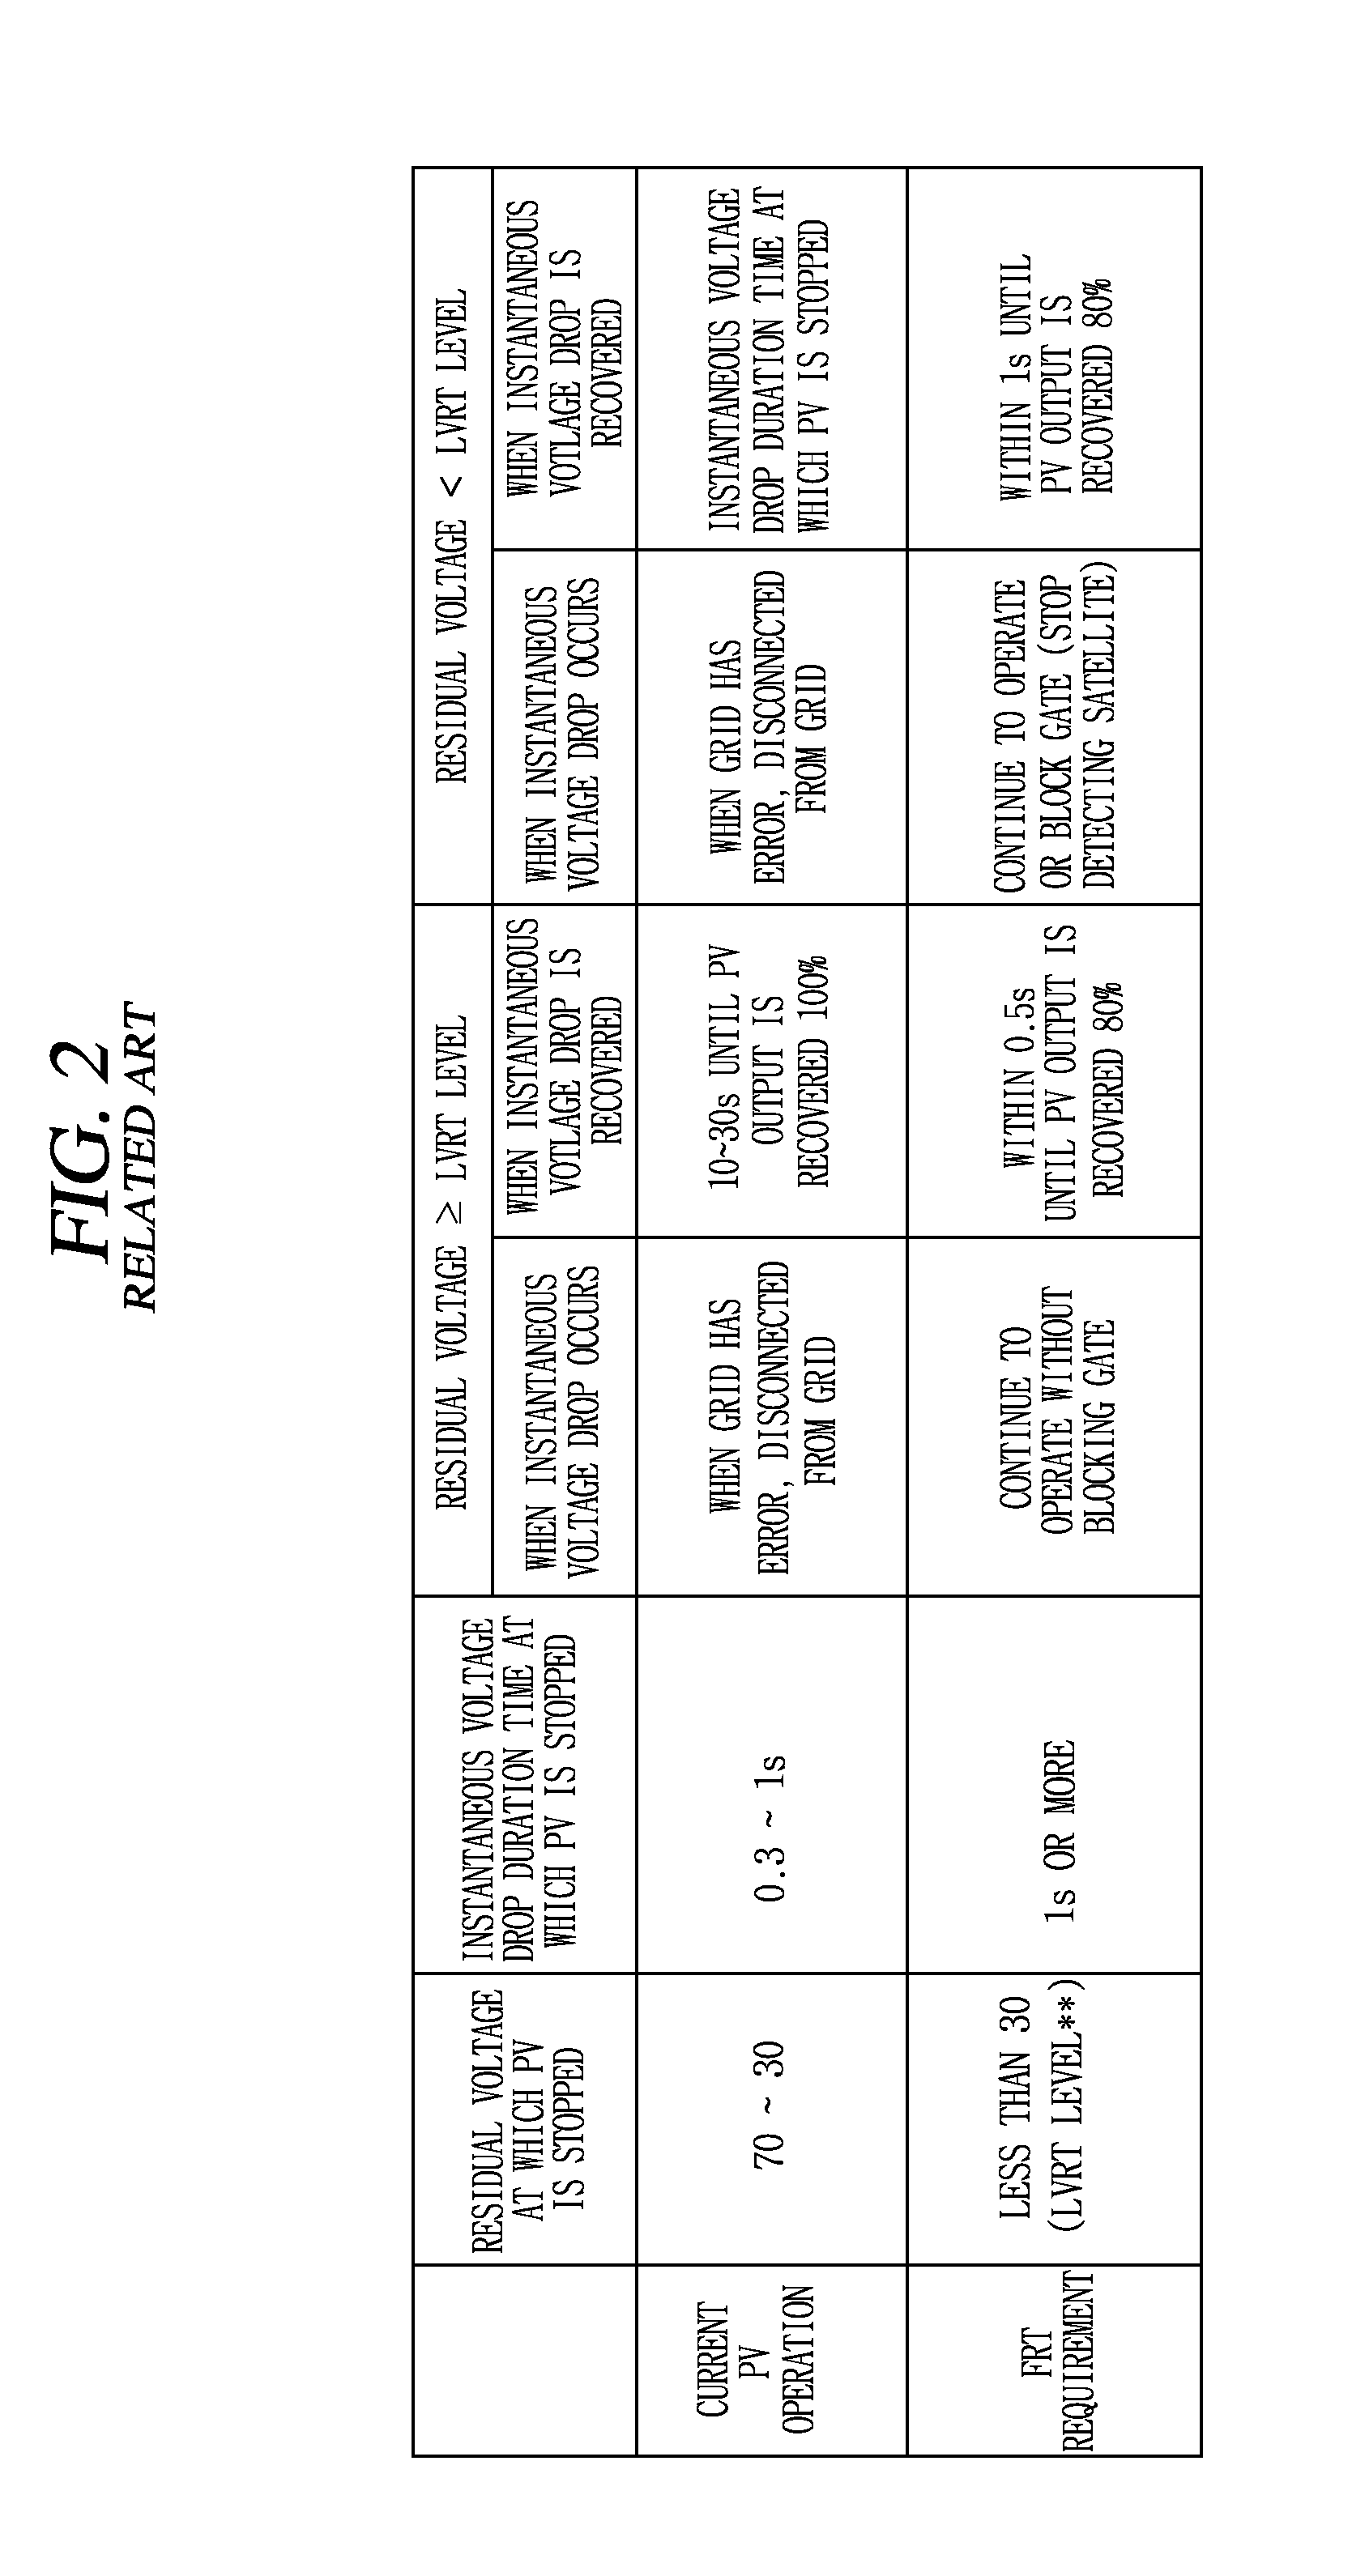 Grid-tied photovoltaic power generation system